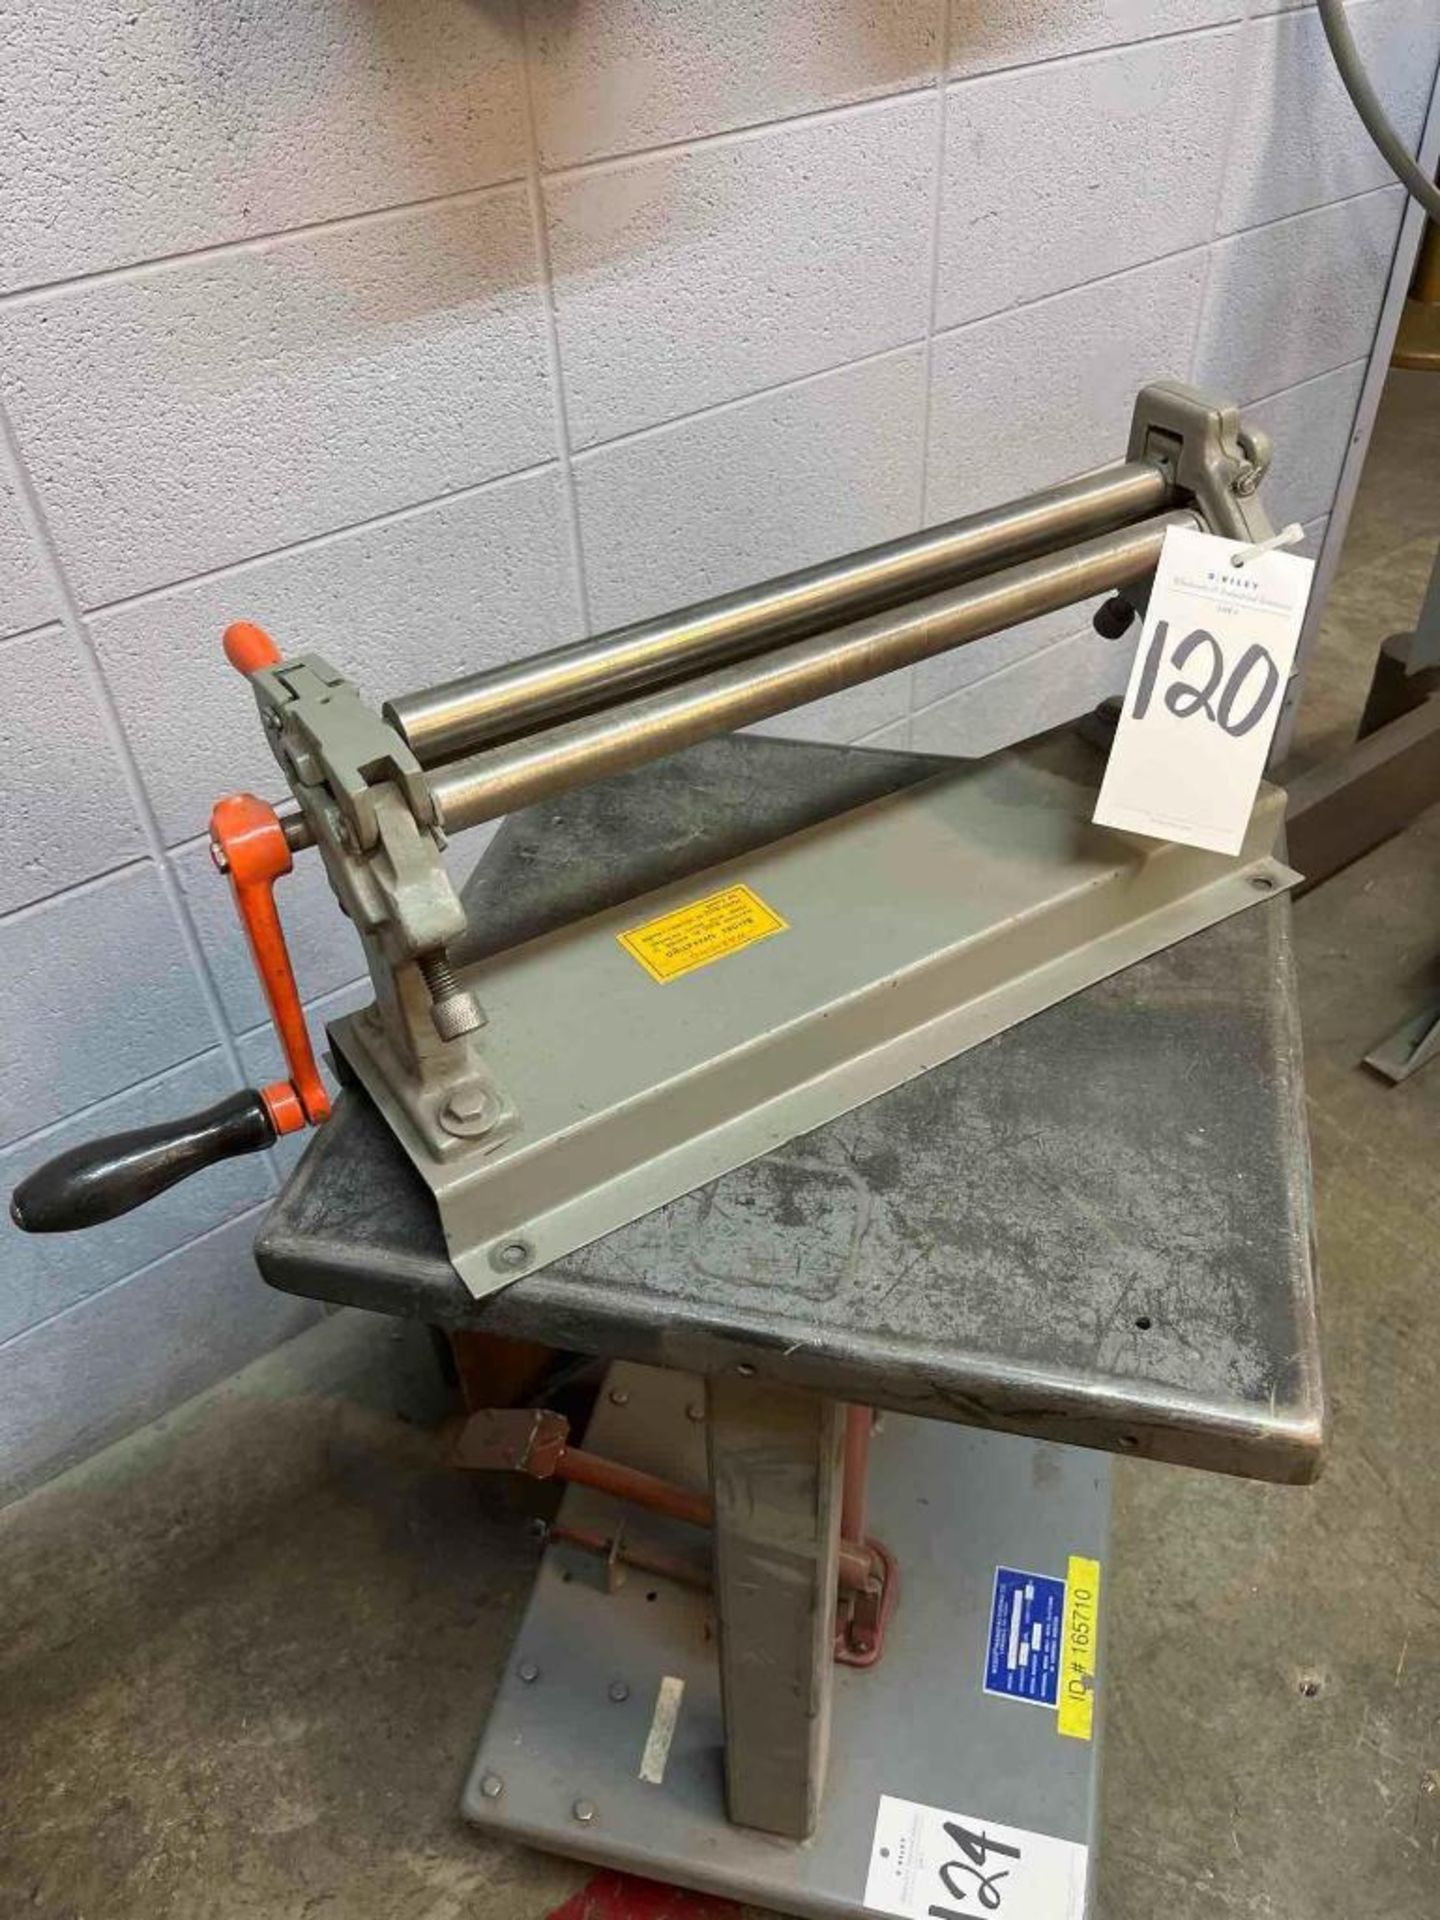 Peck Stow 16” Bench Top Roll